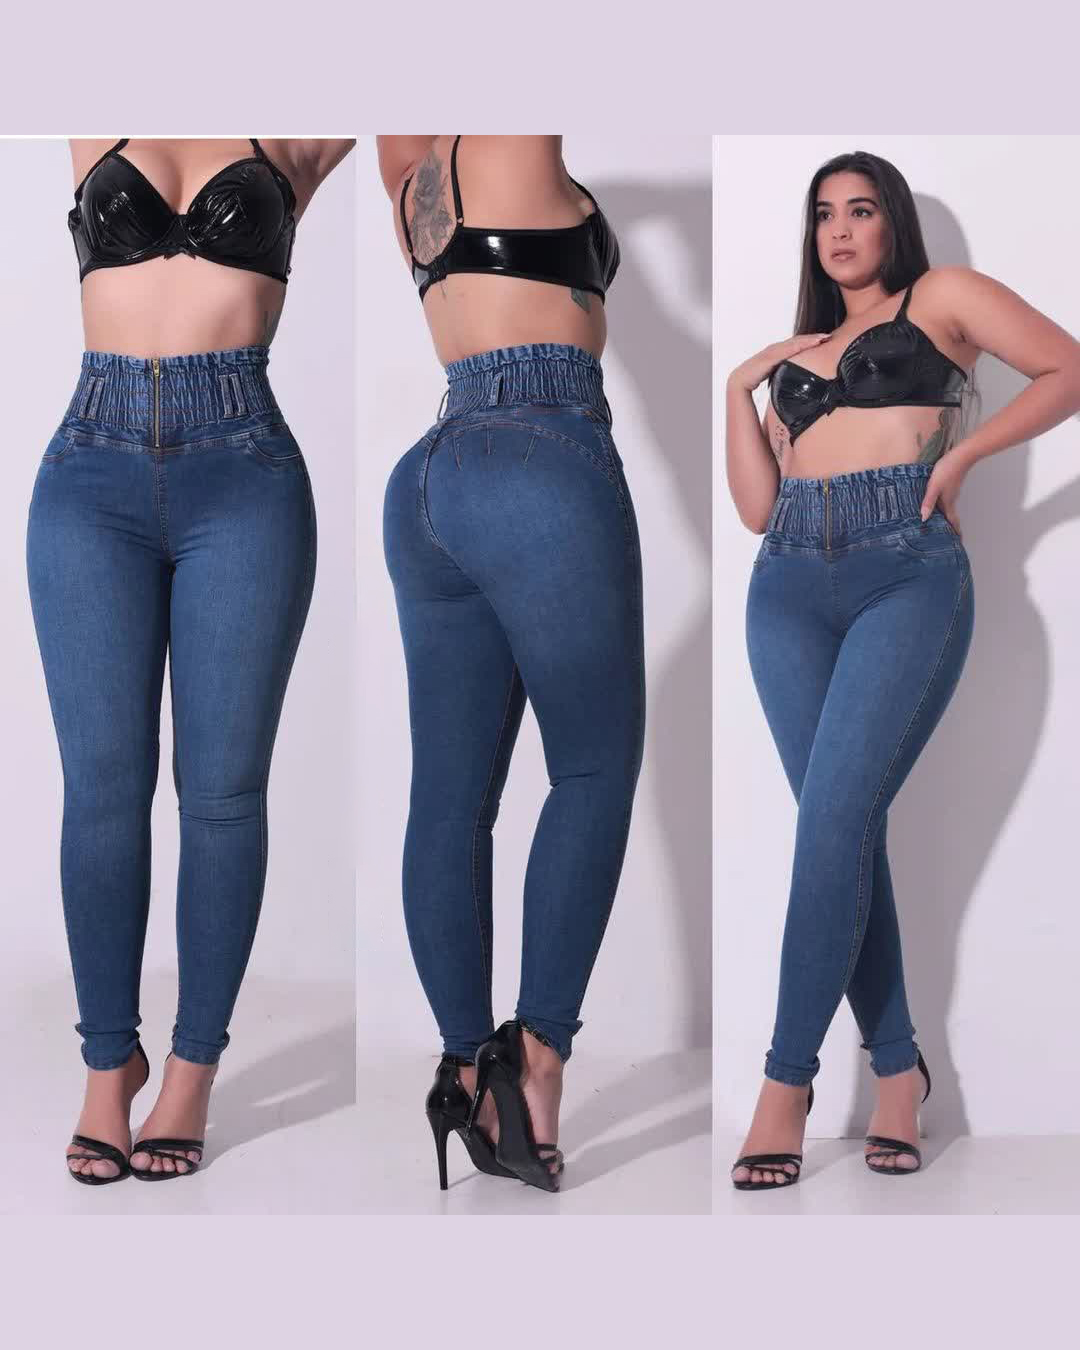 HIigh Waisted Front Zipper Stretchy Jeans